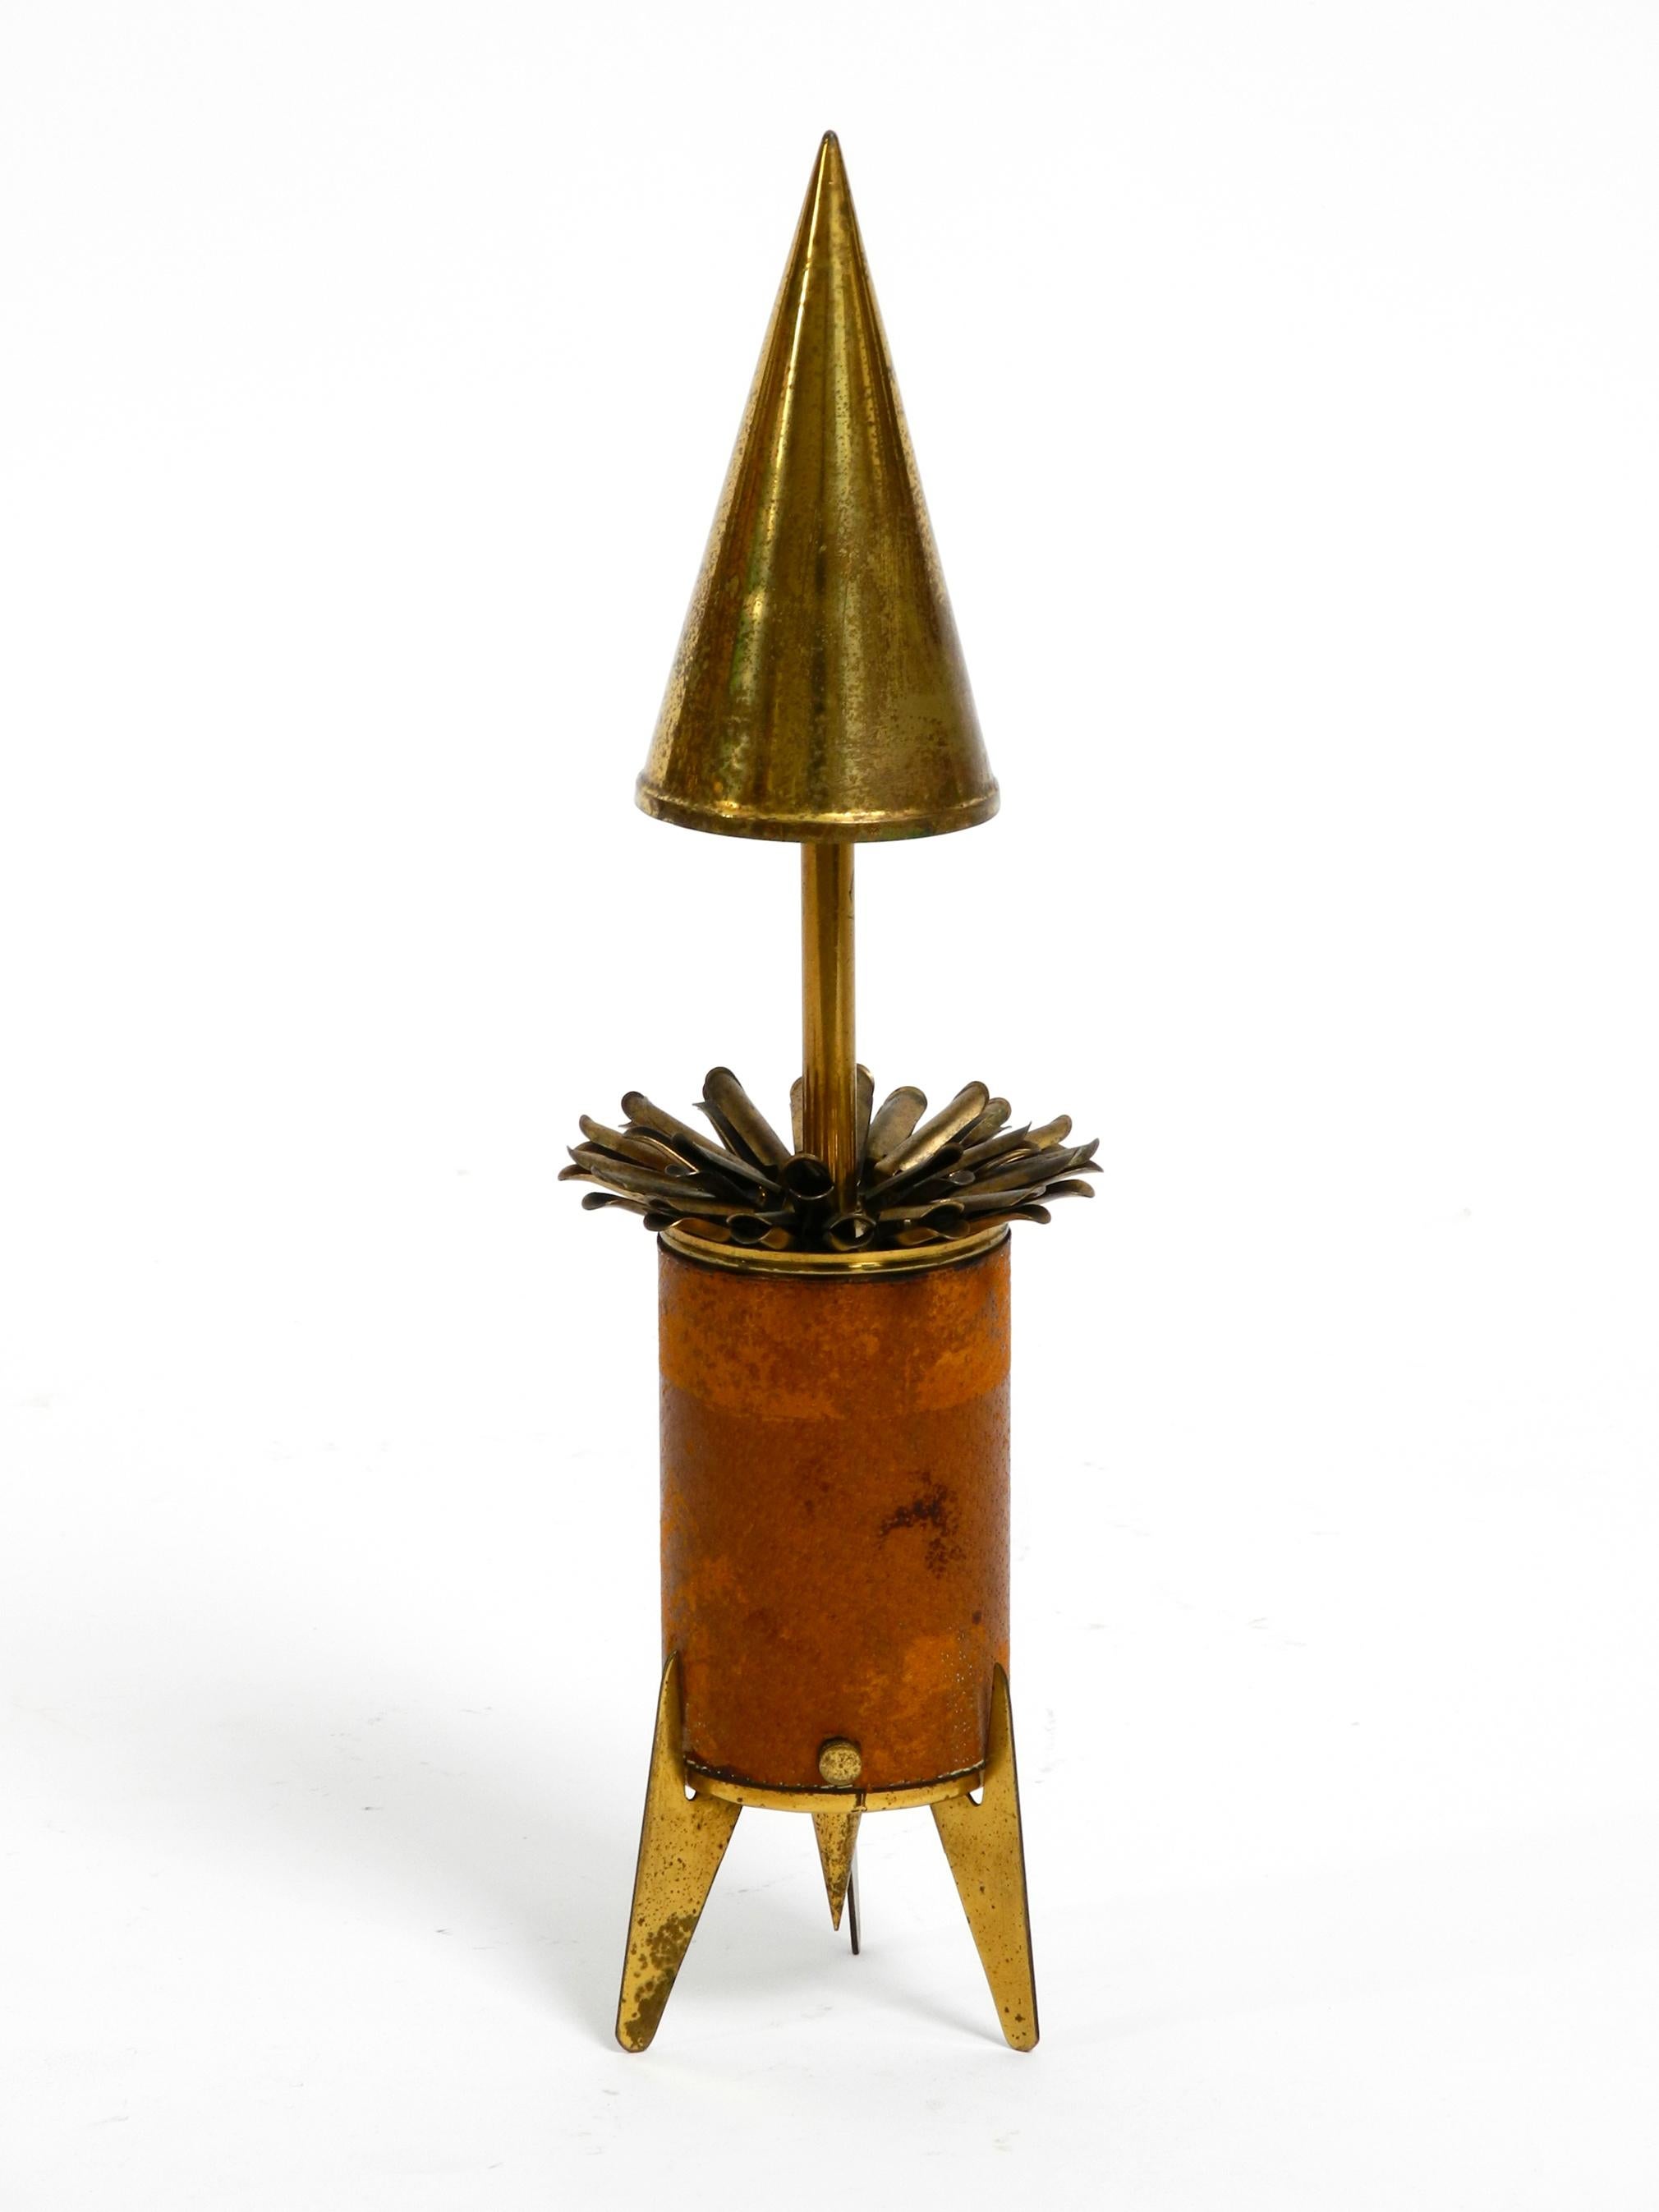 Rare 1960s cigarette dispenser made of brass and leather.
Manufacturer is Brevettato. Made in Italy.
Great unusual piece in the shape of a rocket.
Even if you don't smoke it is a great decoration.
Completely made of brass, covered in the middle